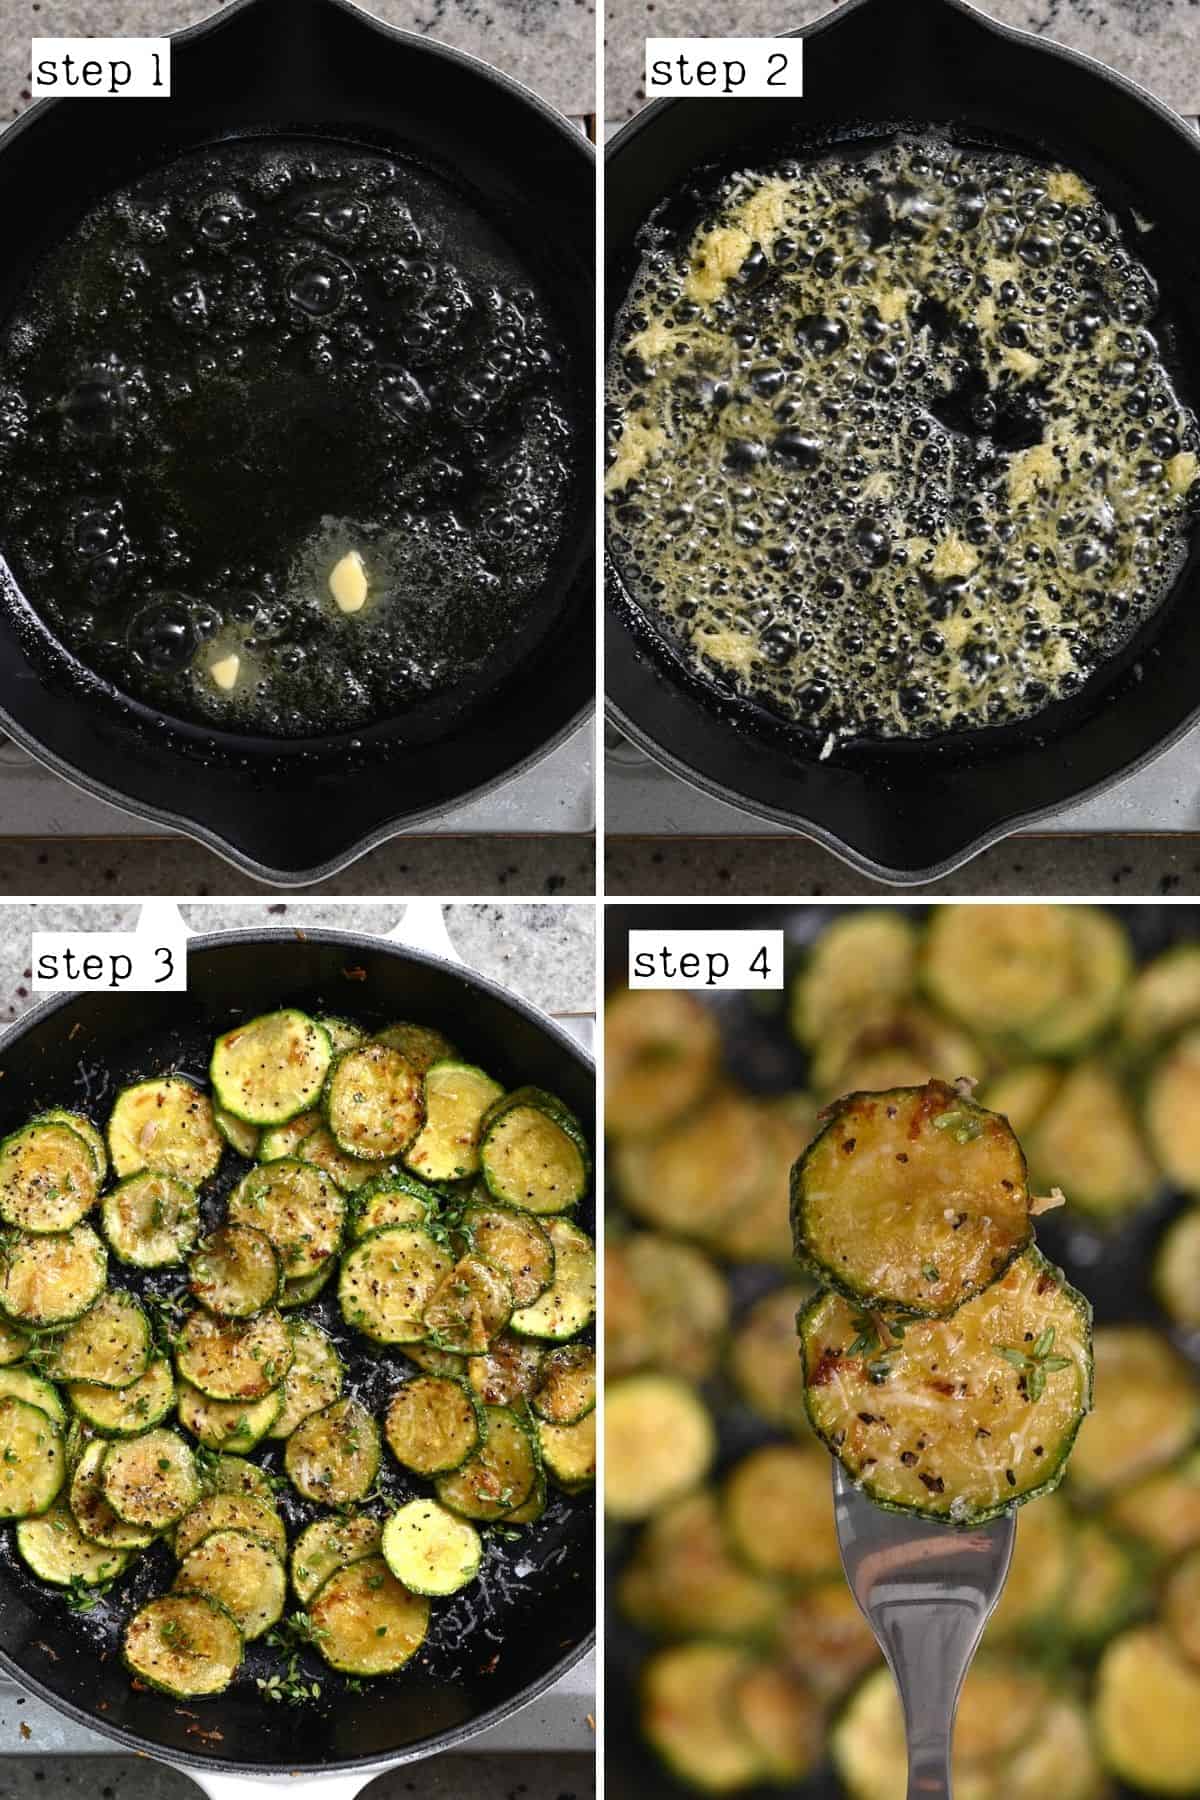 Steps for making fried zucchini with cheese